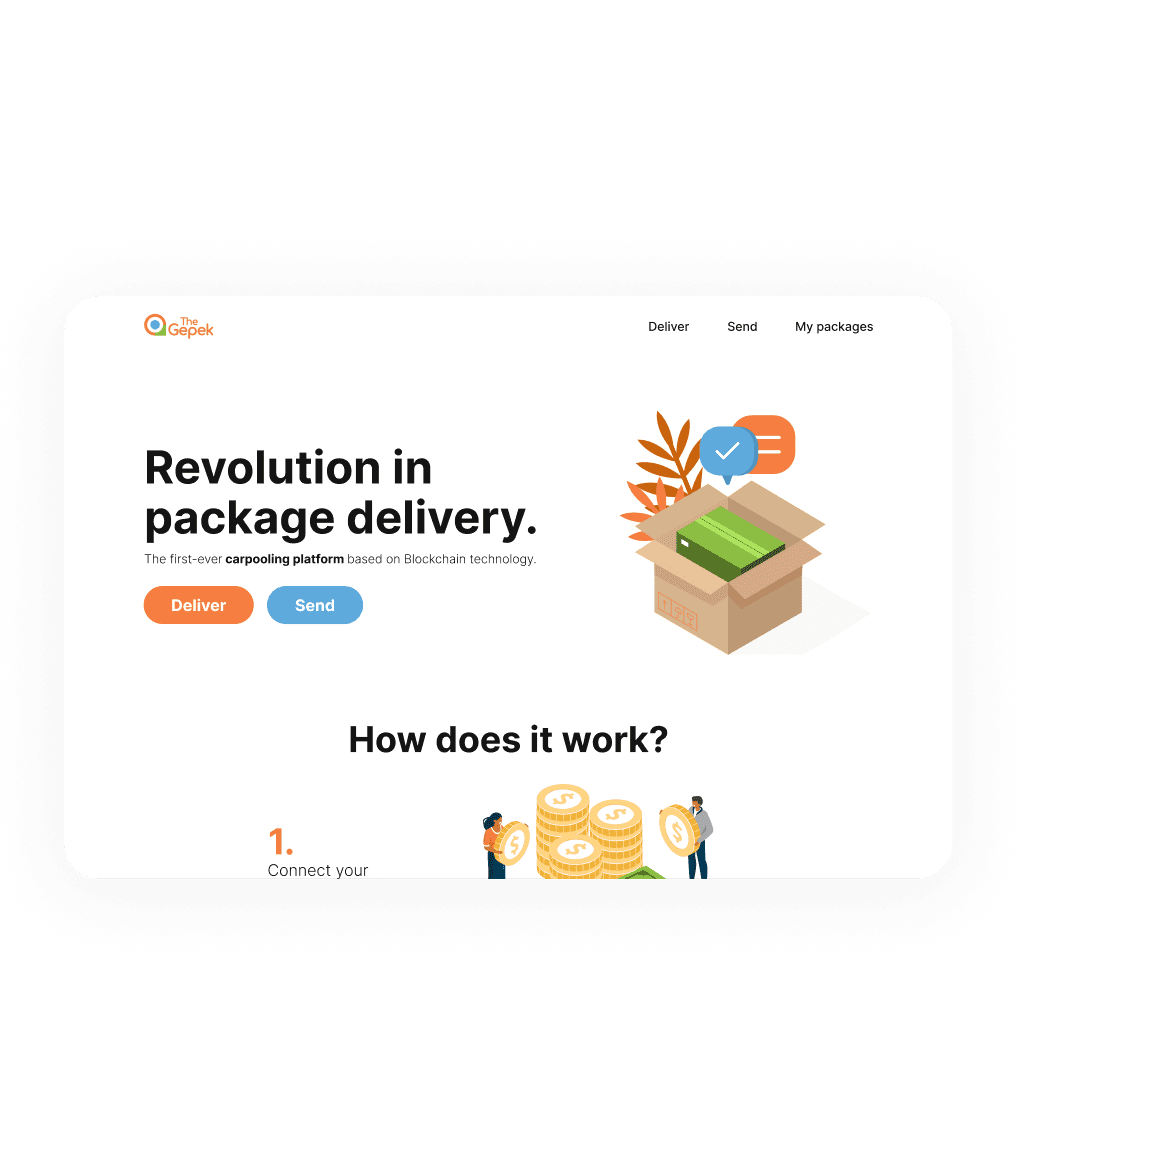 The future of parcel delivery